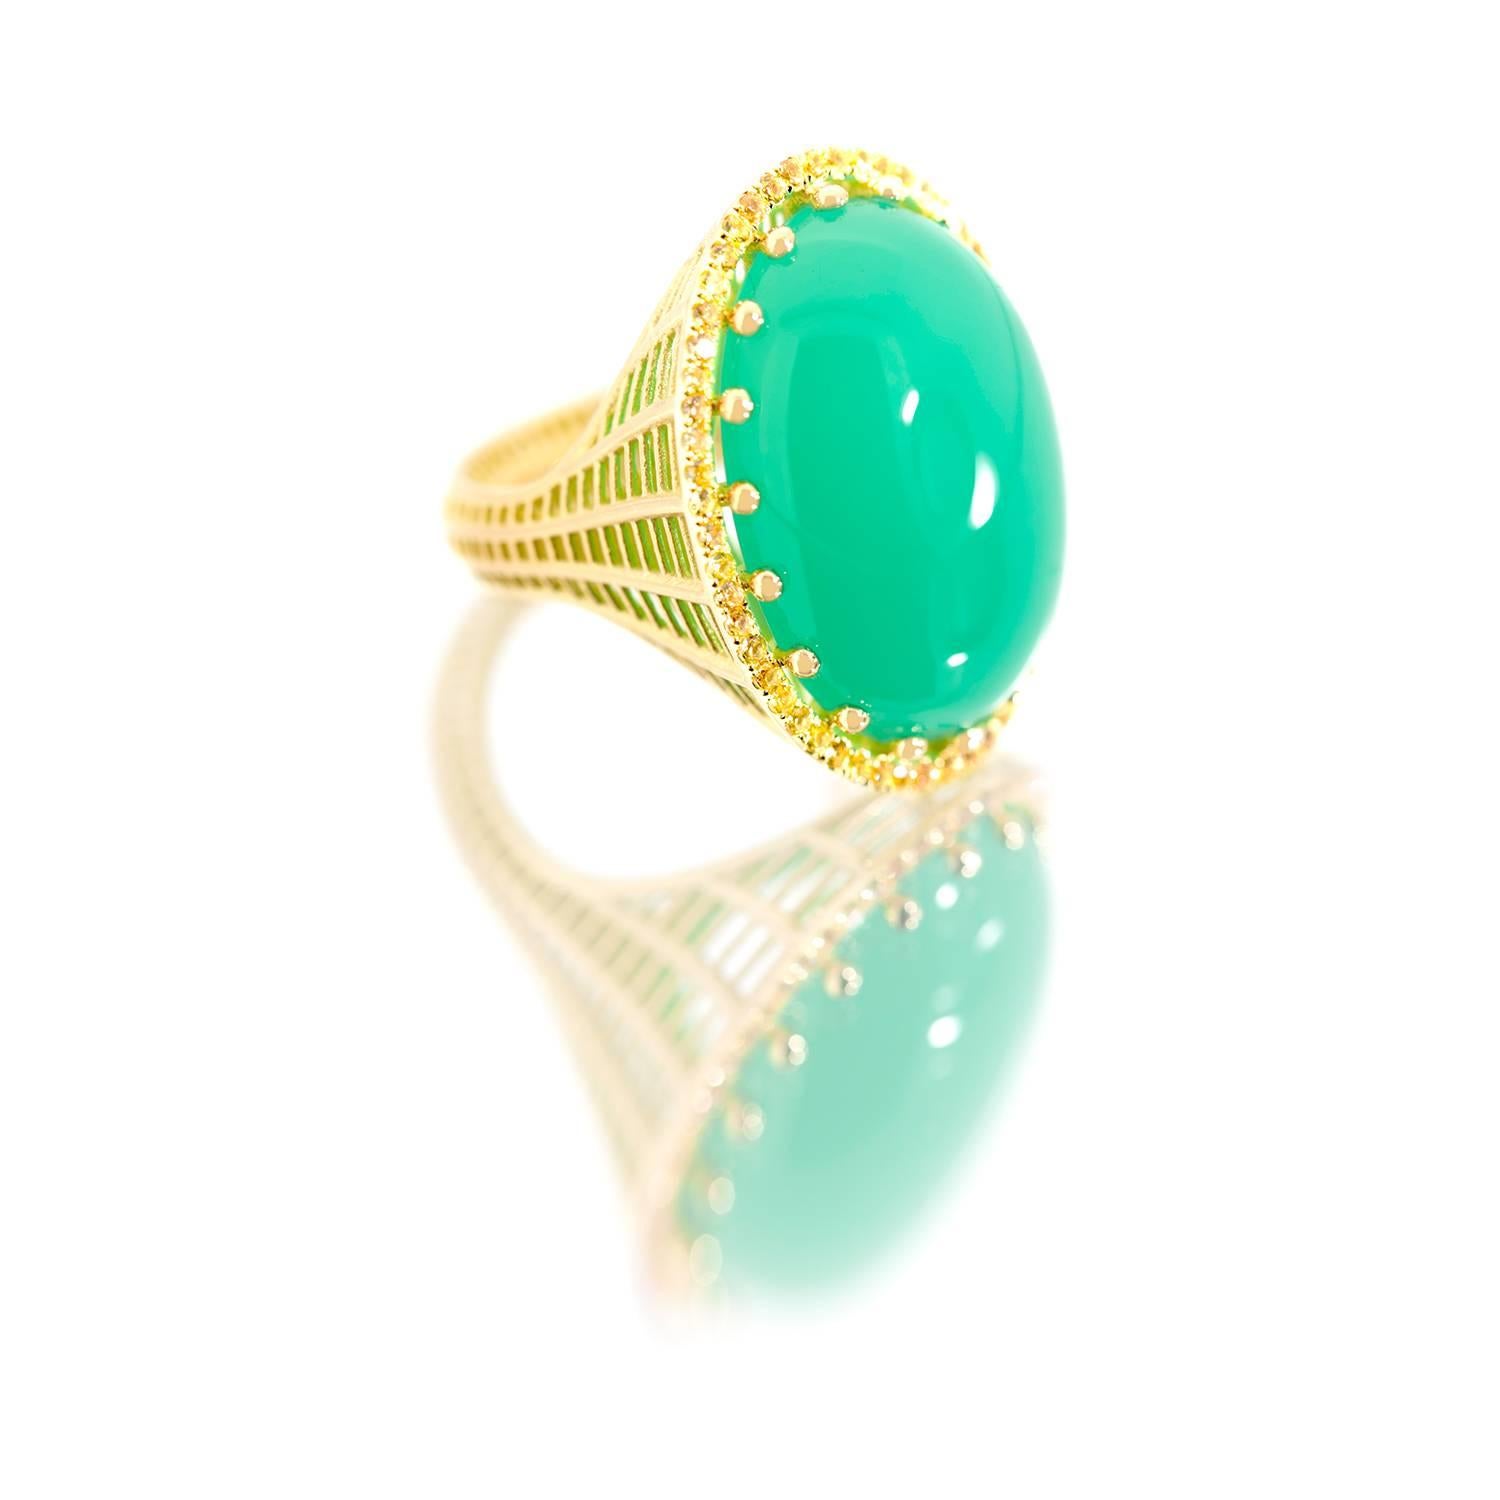 From the Wired Collection, featuring Roule & Company's signature wireform grid, a cocktail ring in 18k yellow gold with a ball-prong-set Australian chrysoprase cabochon (26 cts) and yellow sapphire pavé (0.67 cts). Cabochon is 18 x 24mm (or approx